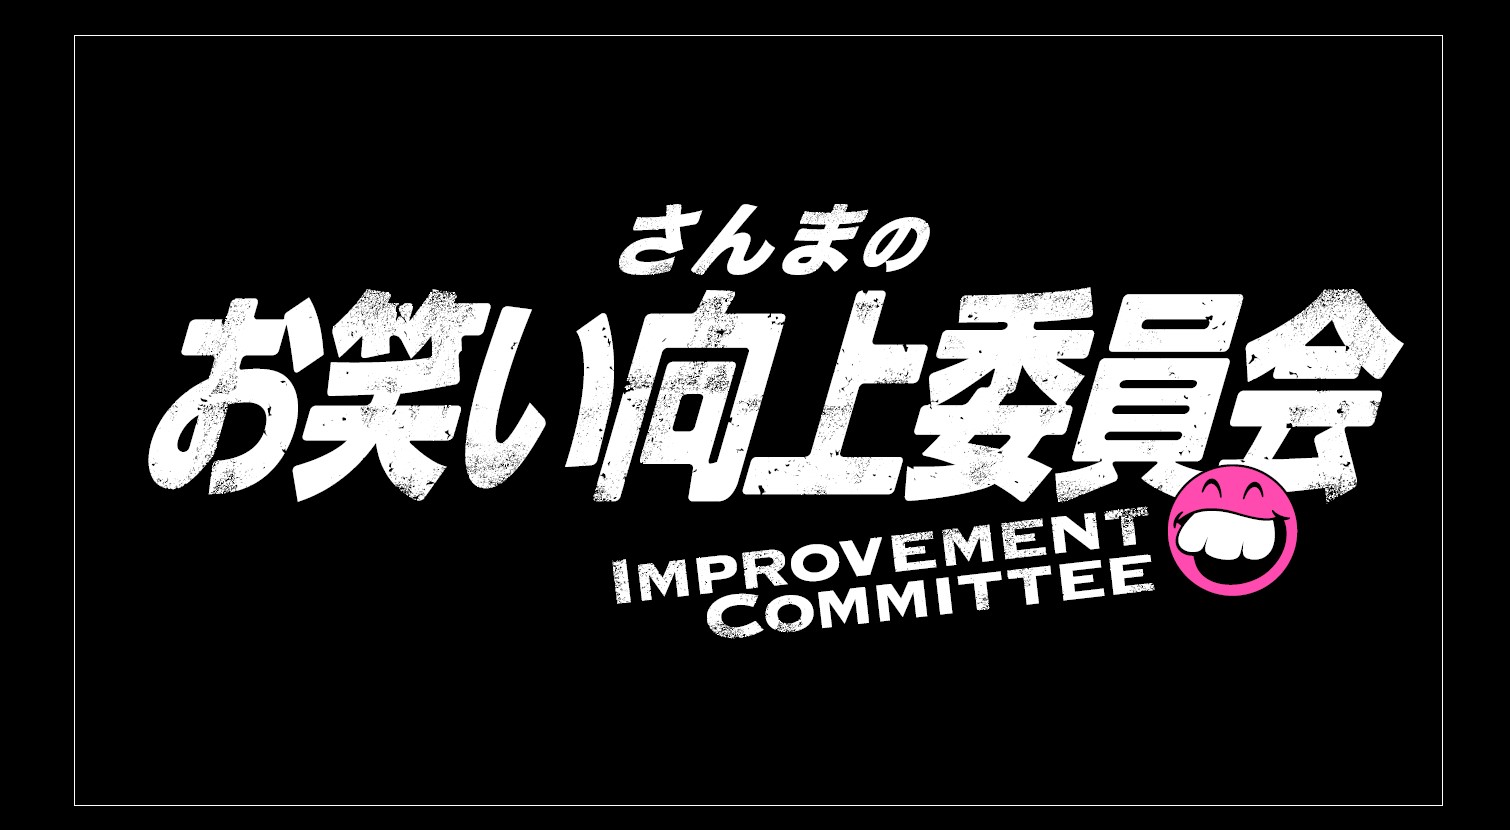 Sanma’s Improvement Committee for Comedians